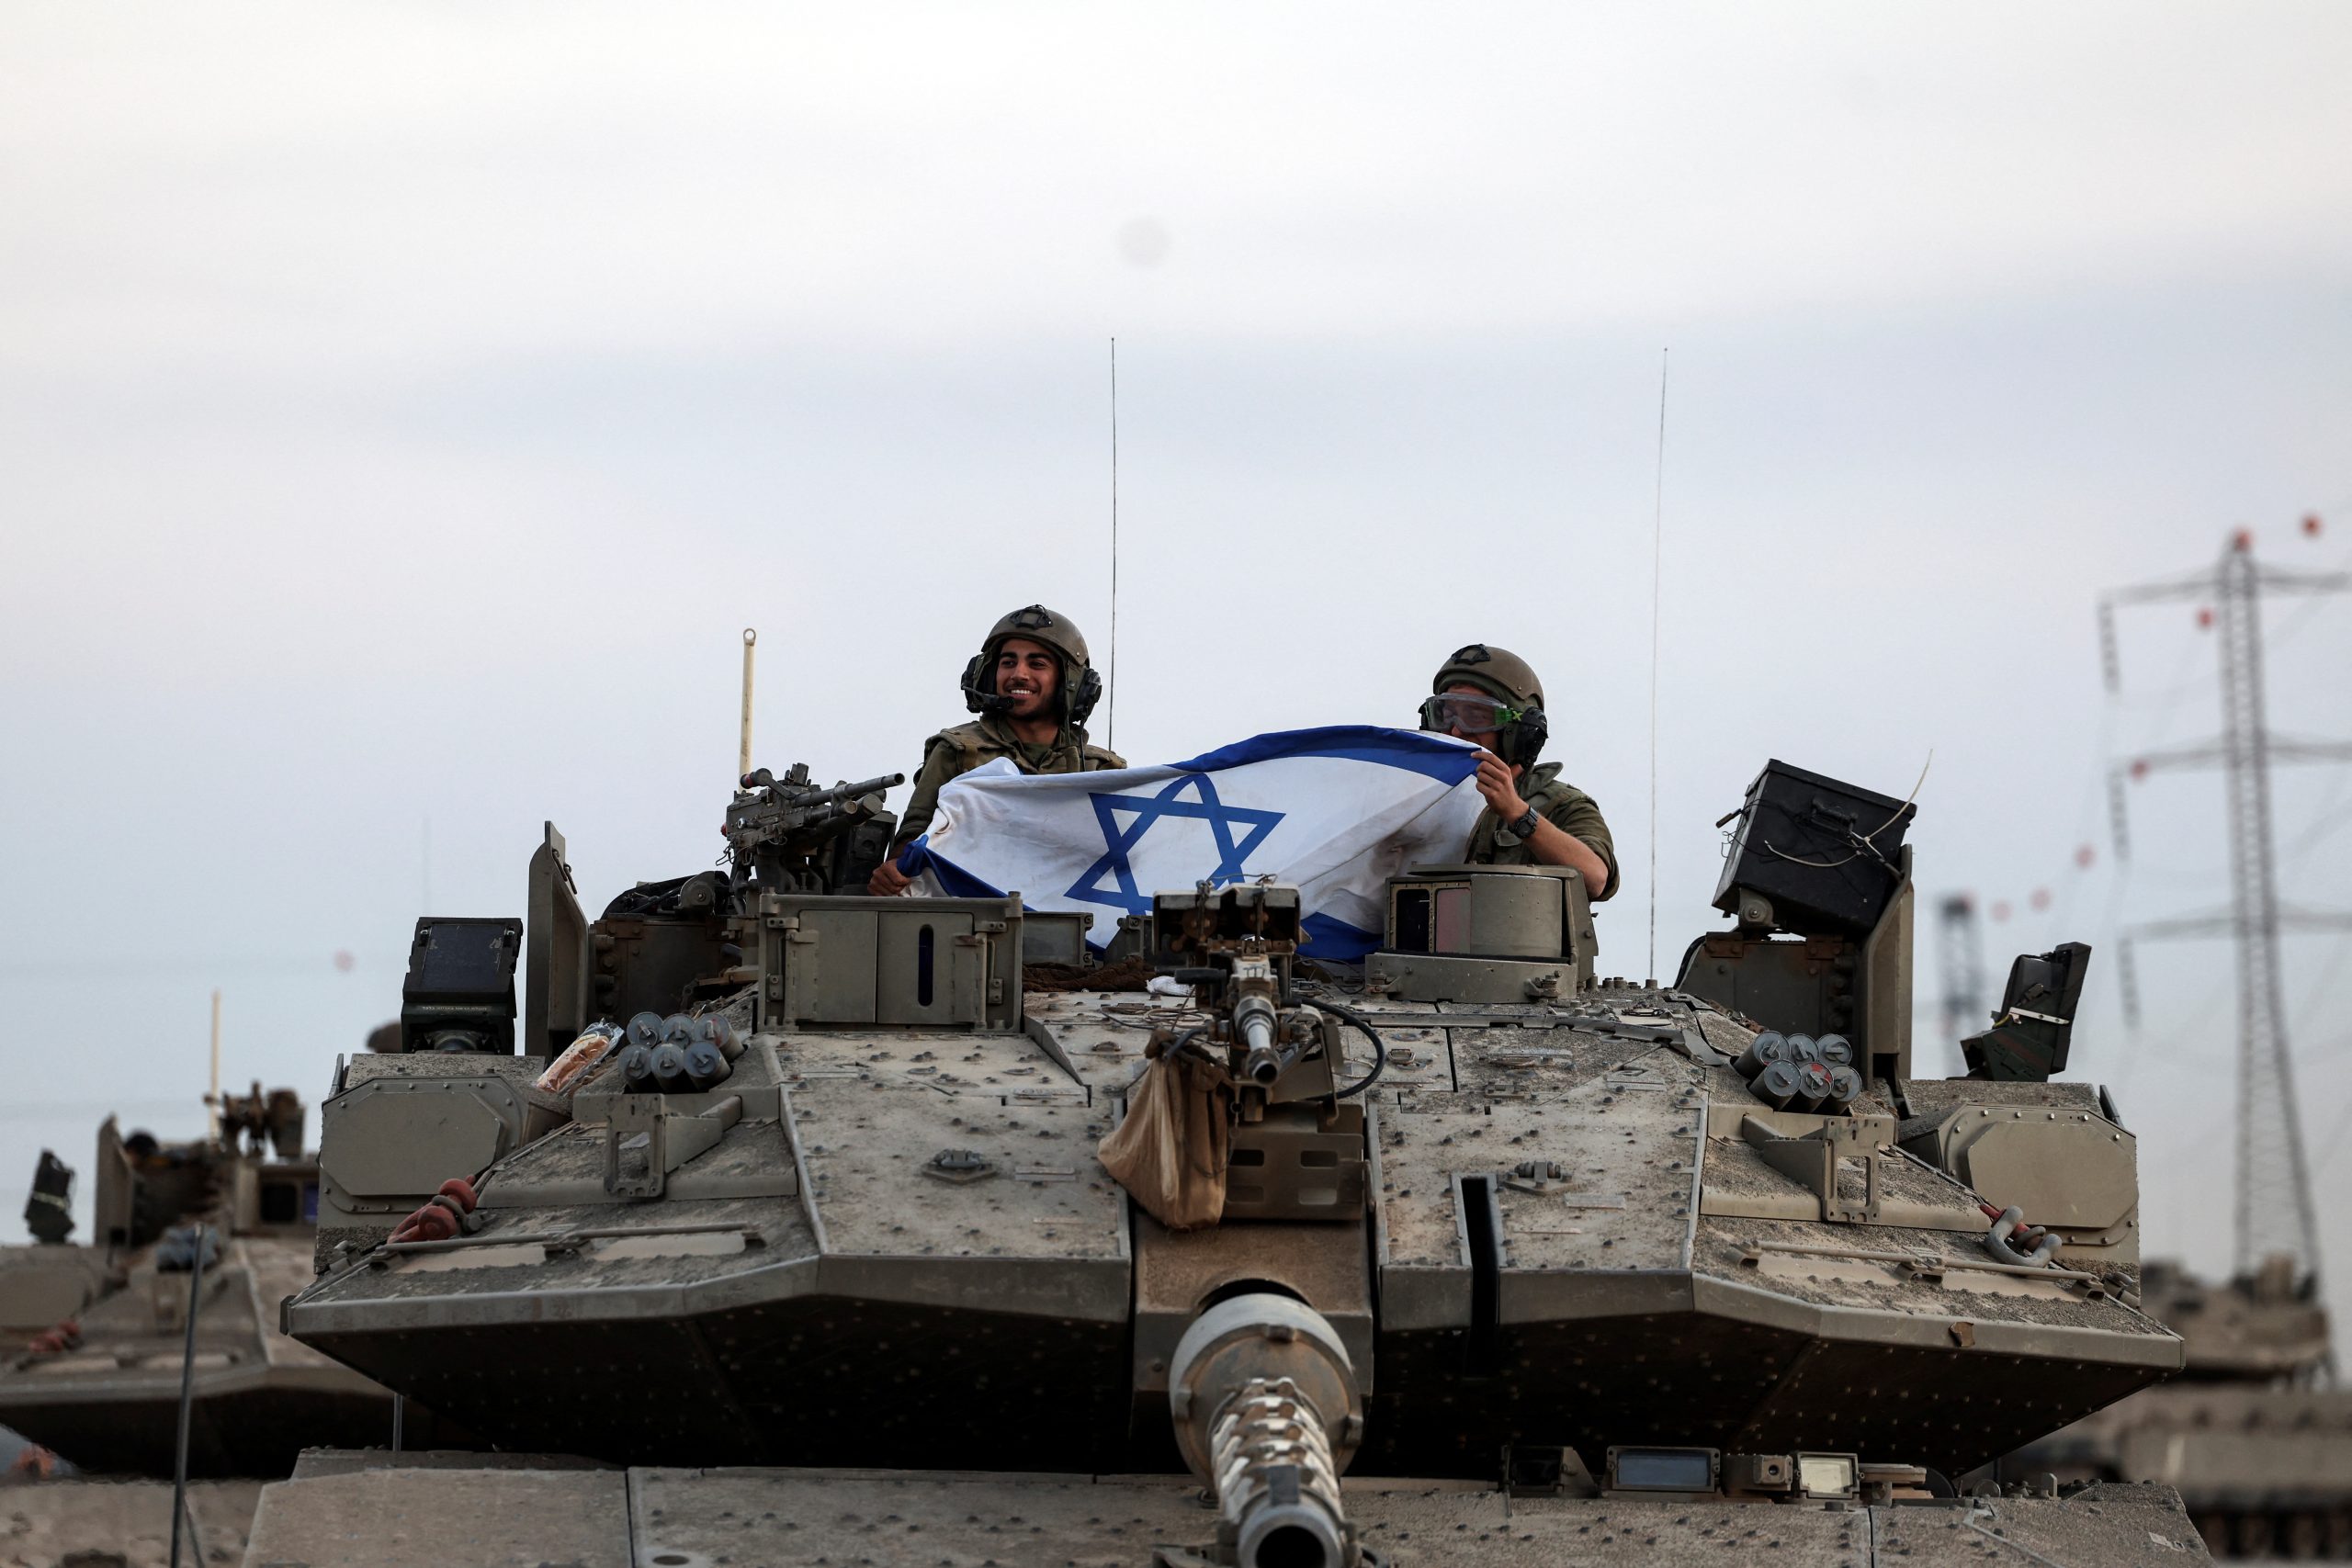 Why Does the U.S. Give So Much Military Aid Money to Israel? - The Atlantic